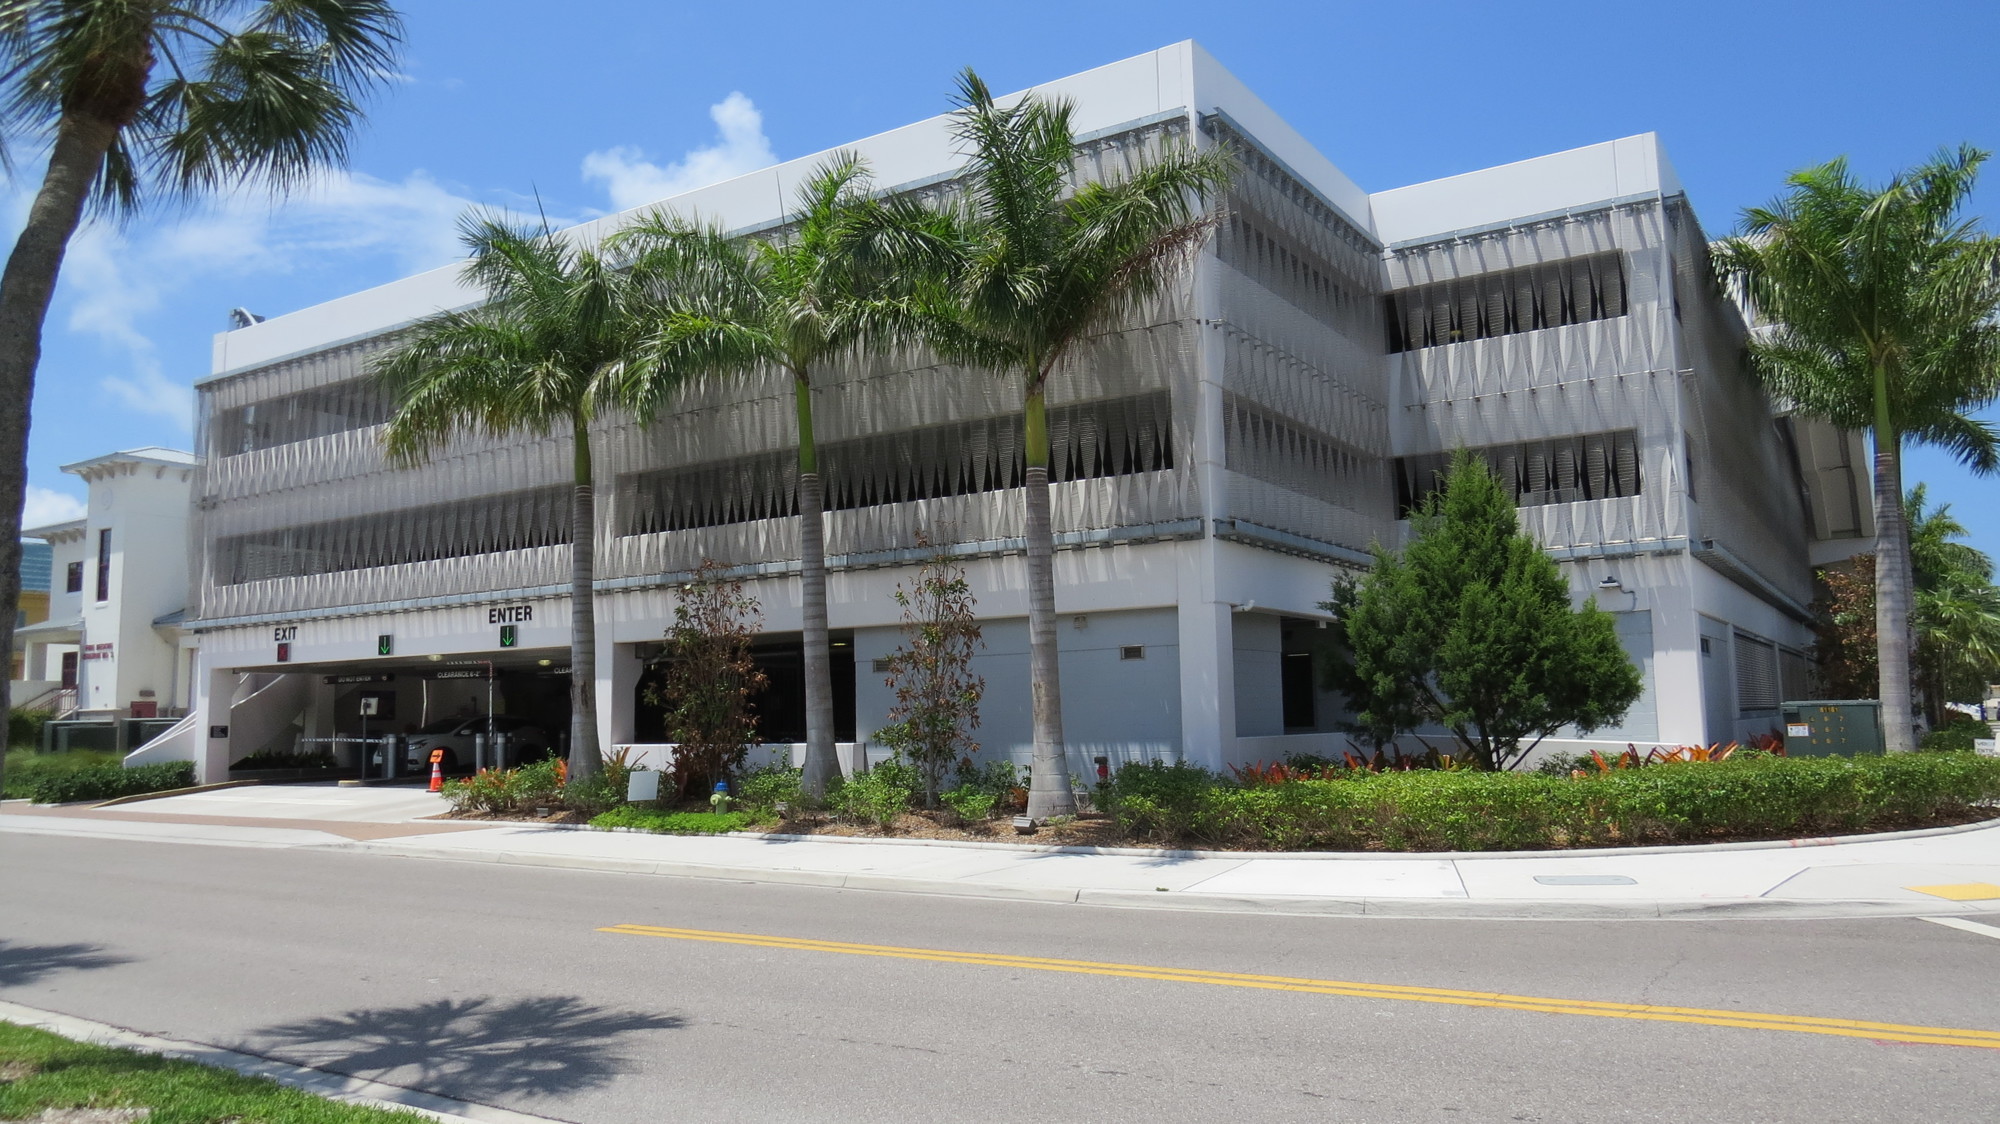 The three-year-old city parking deck one block removed from St. Armands Circle is a partnership between the City of Sarasota and the St. Armands Circle Business Improvement District. (Andrew Warfield)